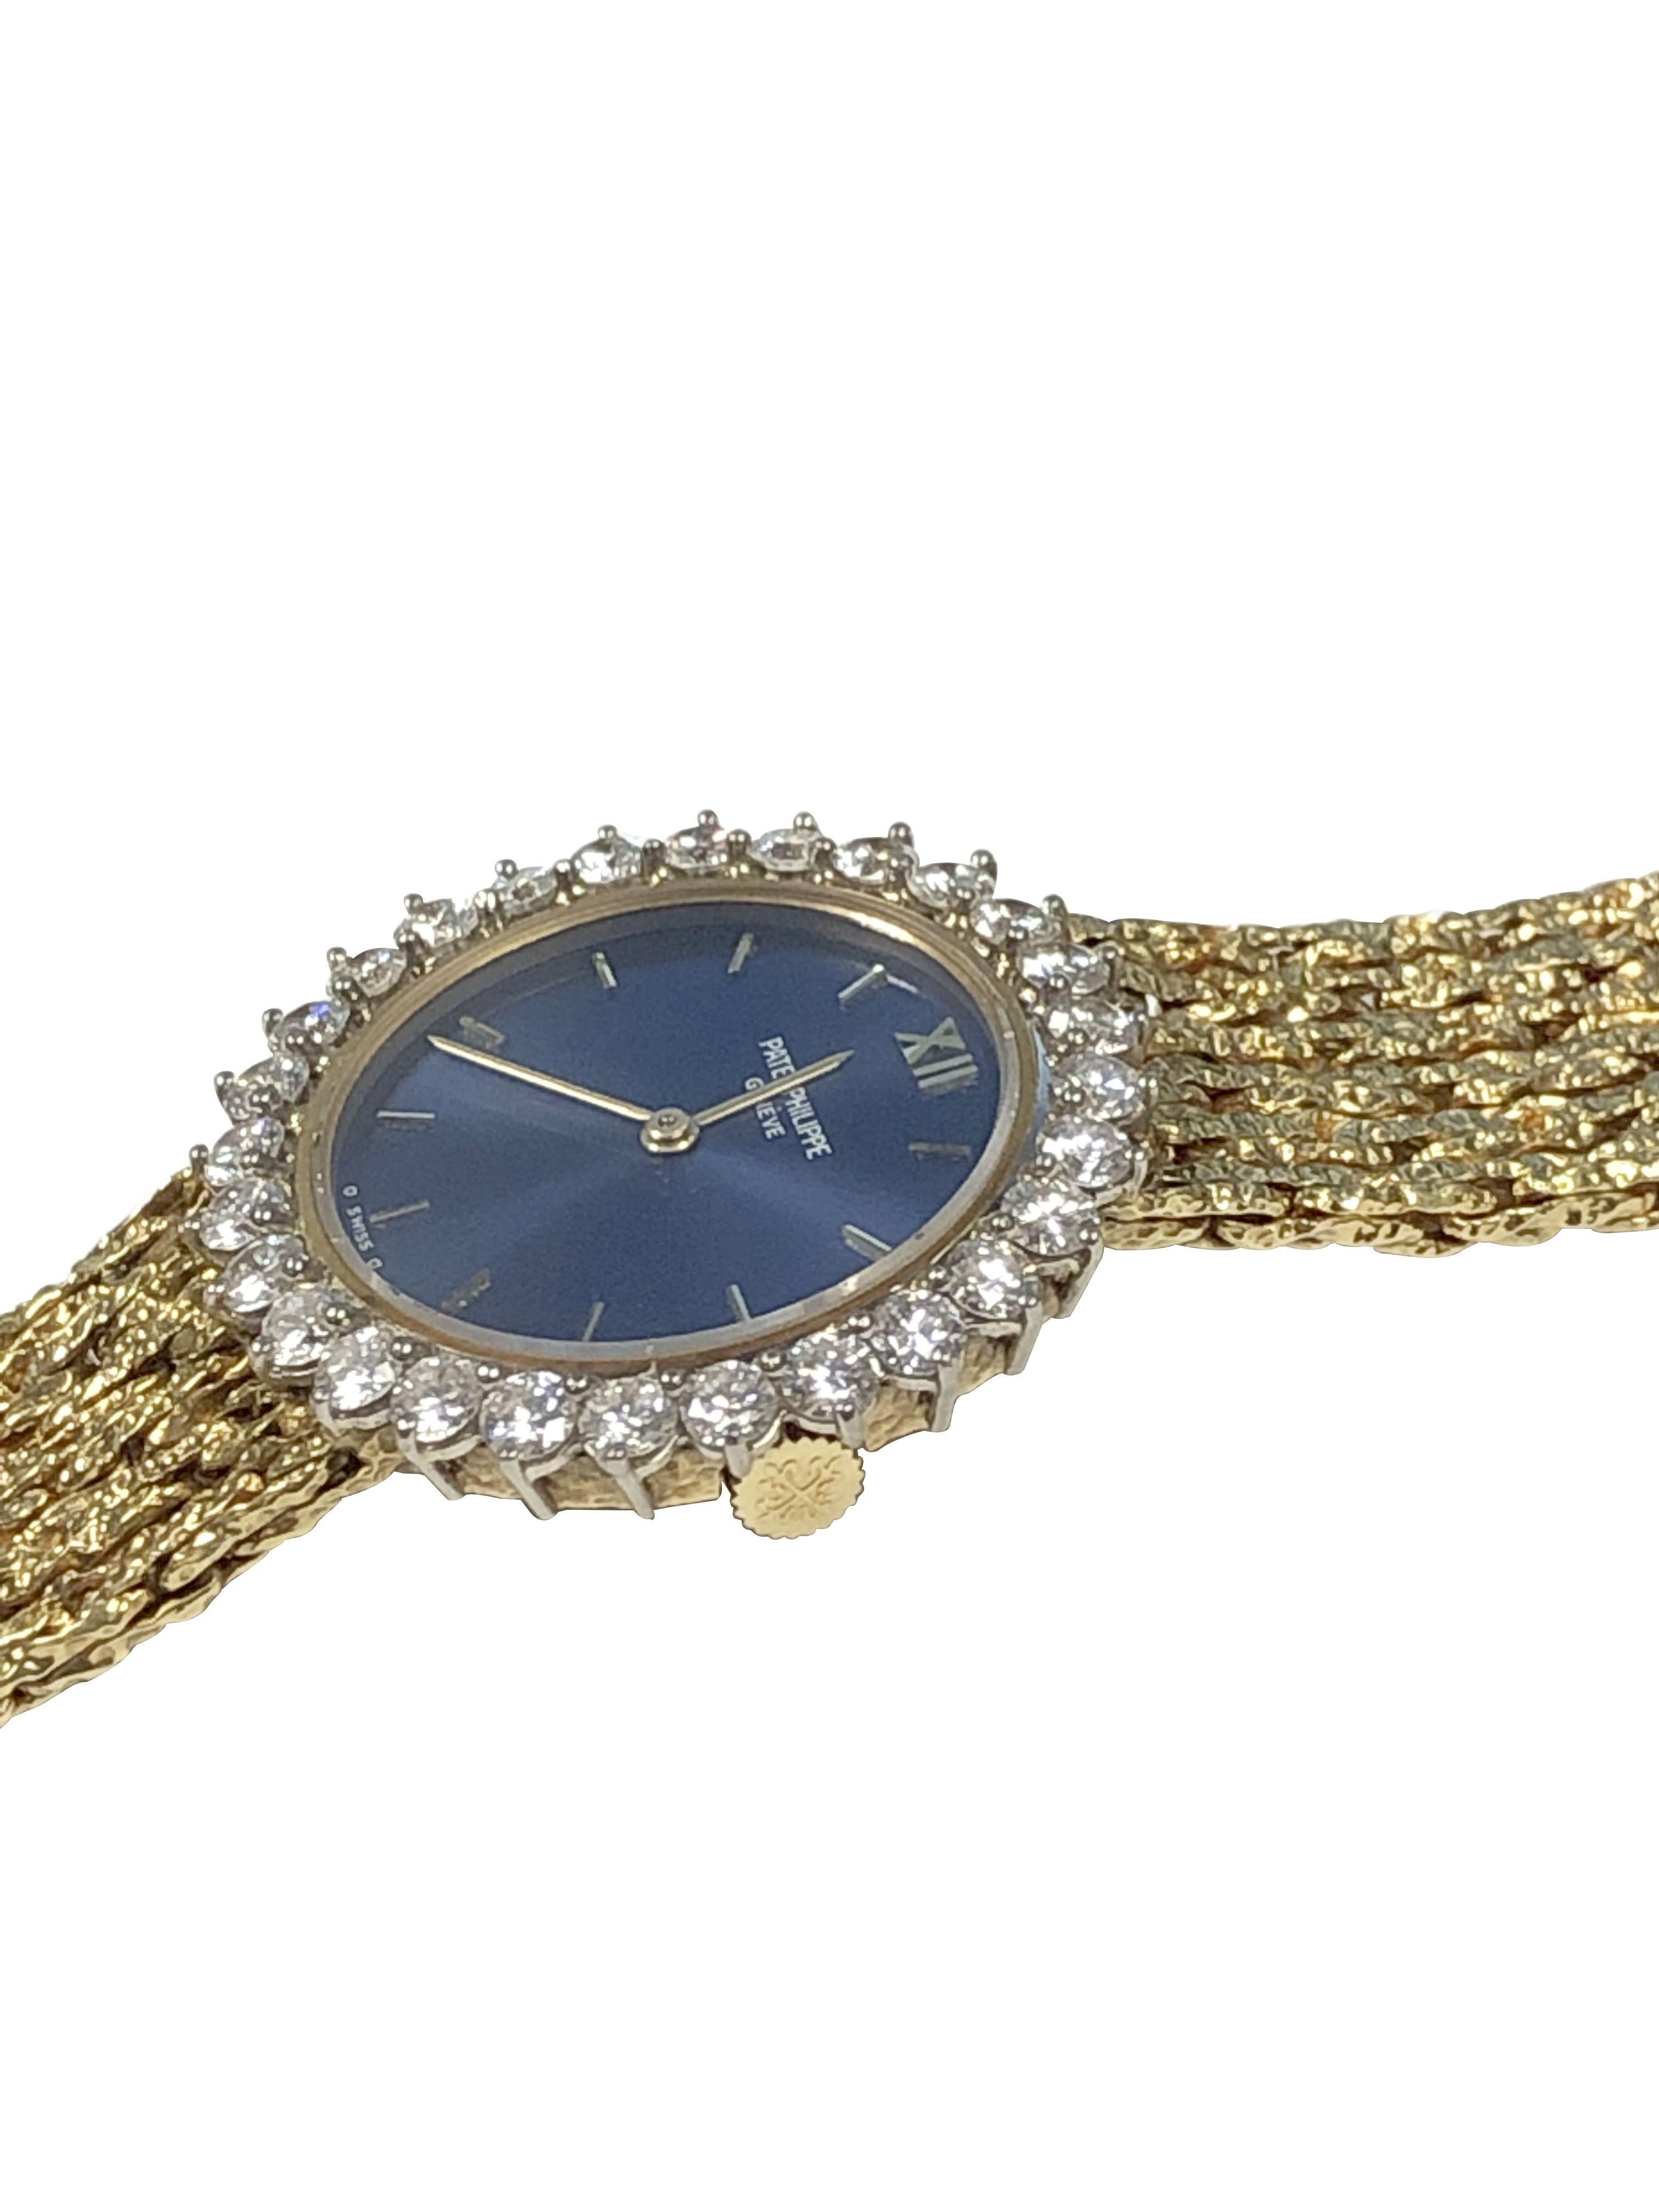 Circa 1970s Patek Philippe Ladies Wrist Watch, 26 M.M. 18K Yellow Gold 2 Piece case with White Gold bezel Factory set with Round Brilliant cut Diamonds totaling 1.50 Carats, 18 Jewel Mechanical, manual wind movement. Blue Satin dial with Raised Gold